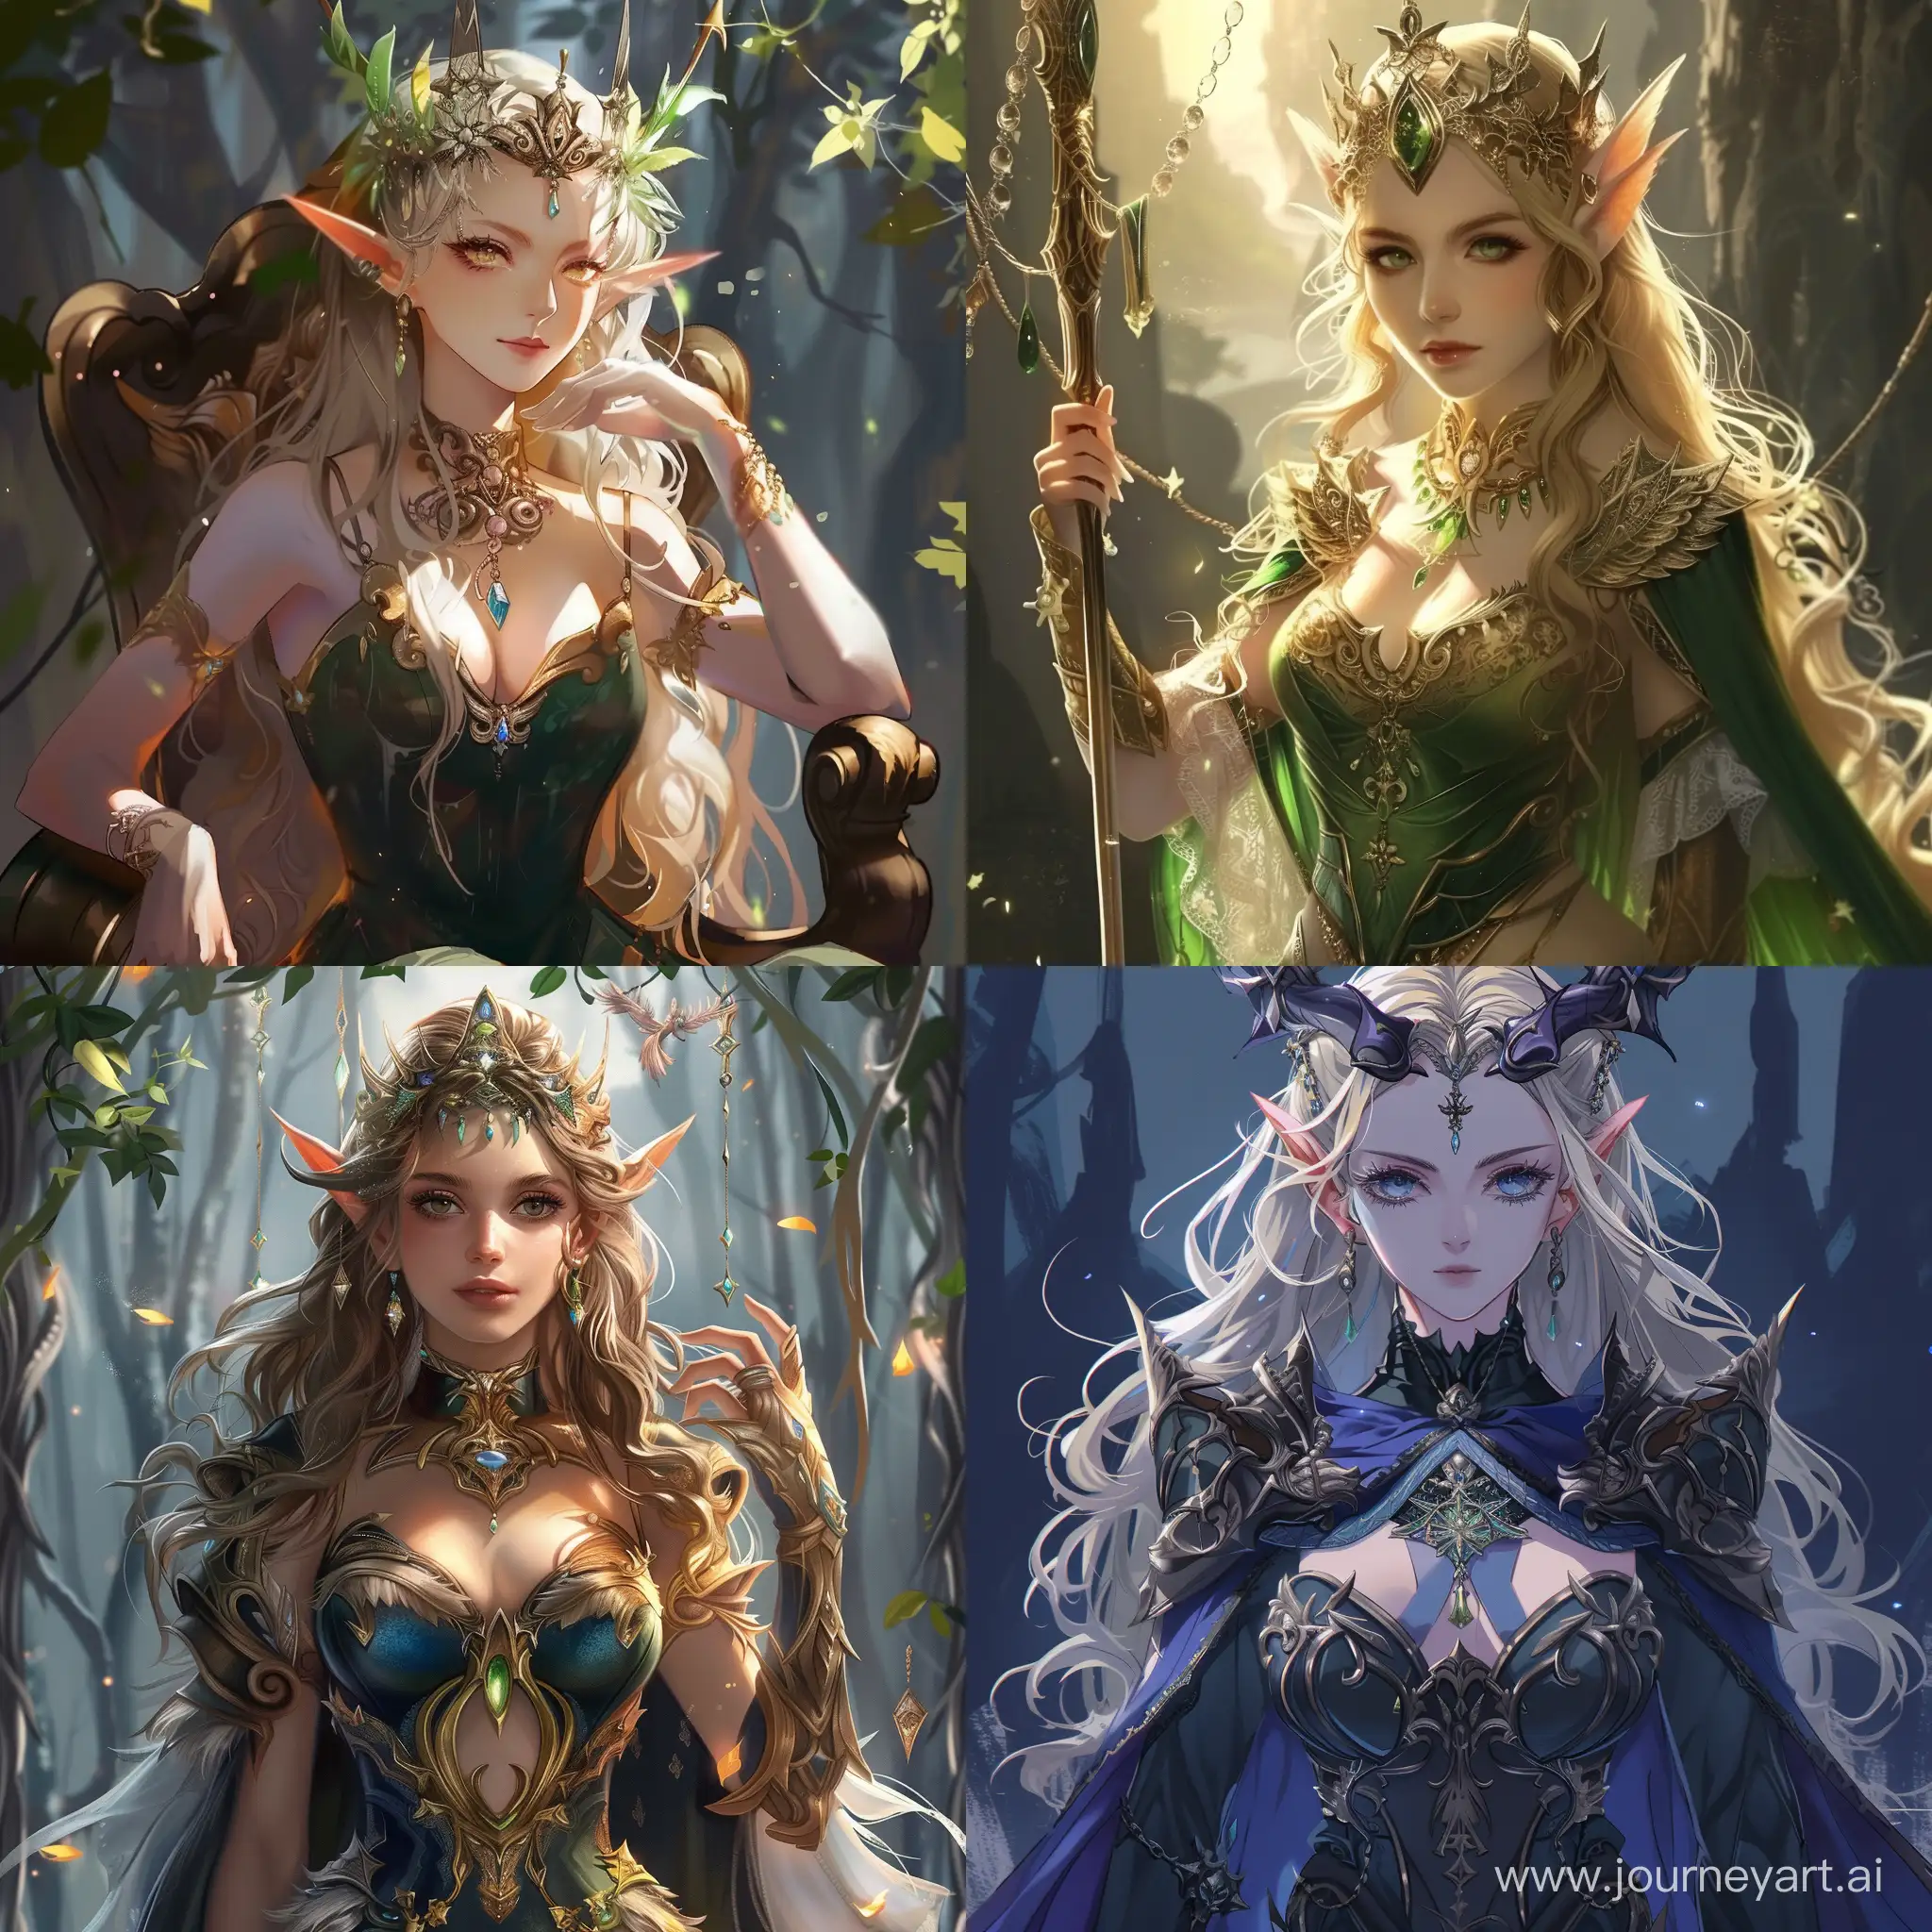 An anime style powerful queen of elves.